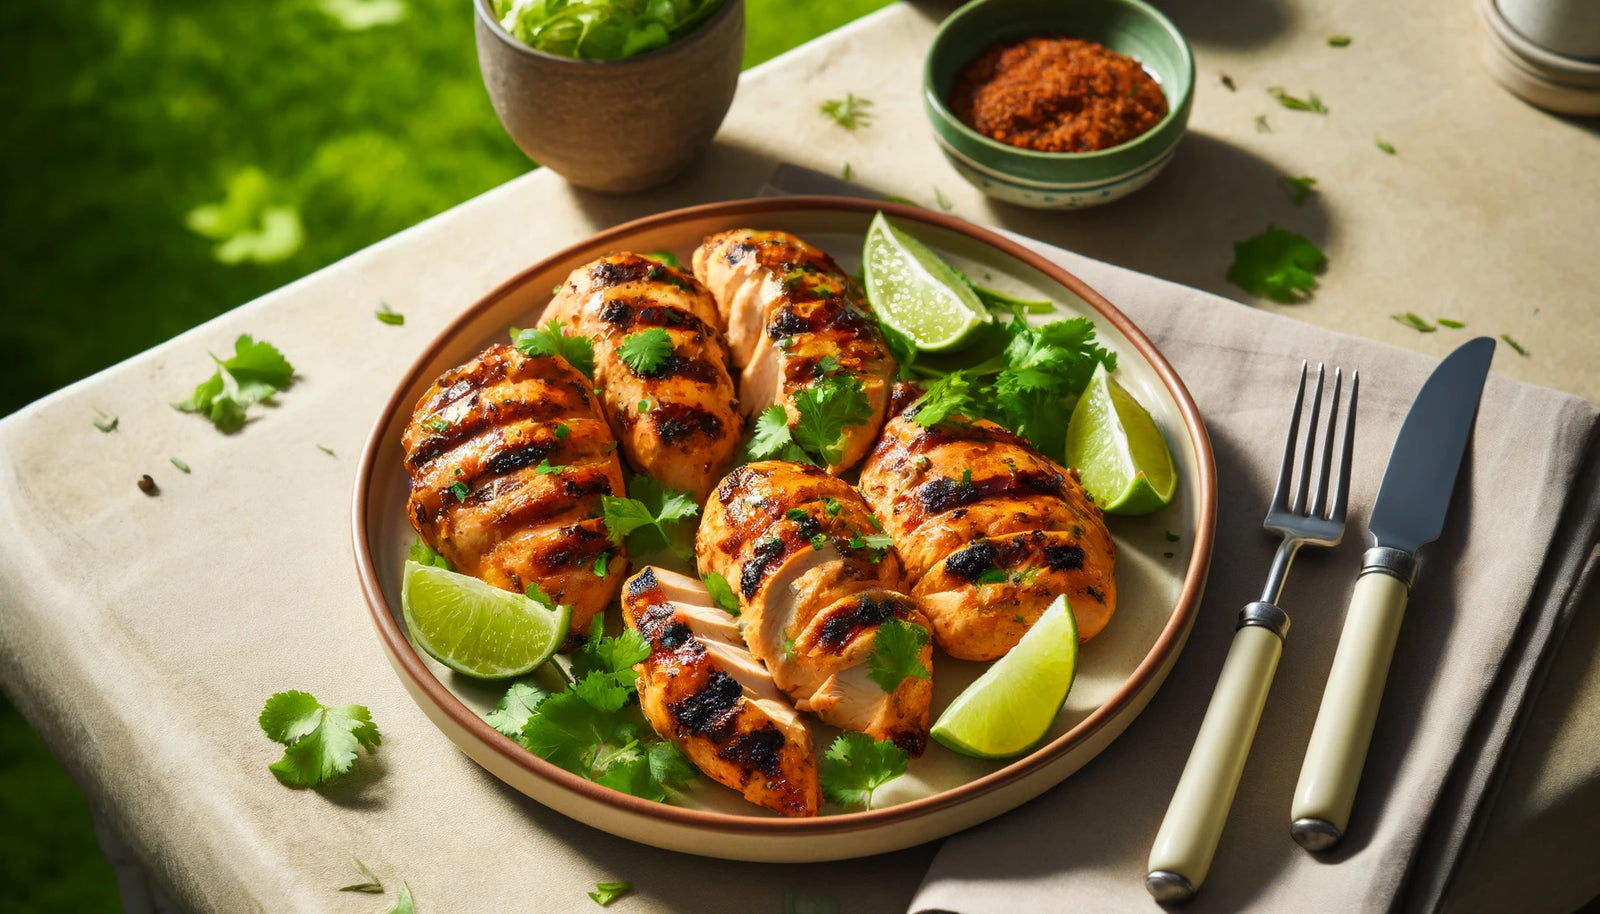 Grilled Chipotle Chicken Recipe on the Arteflame Grill